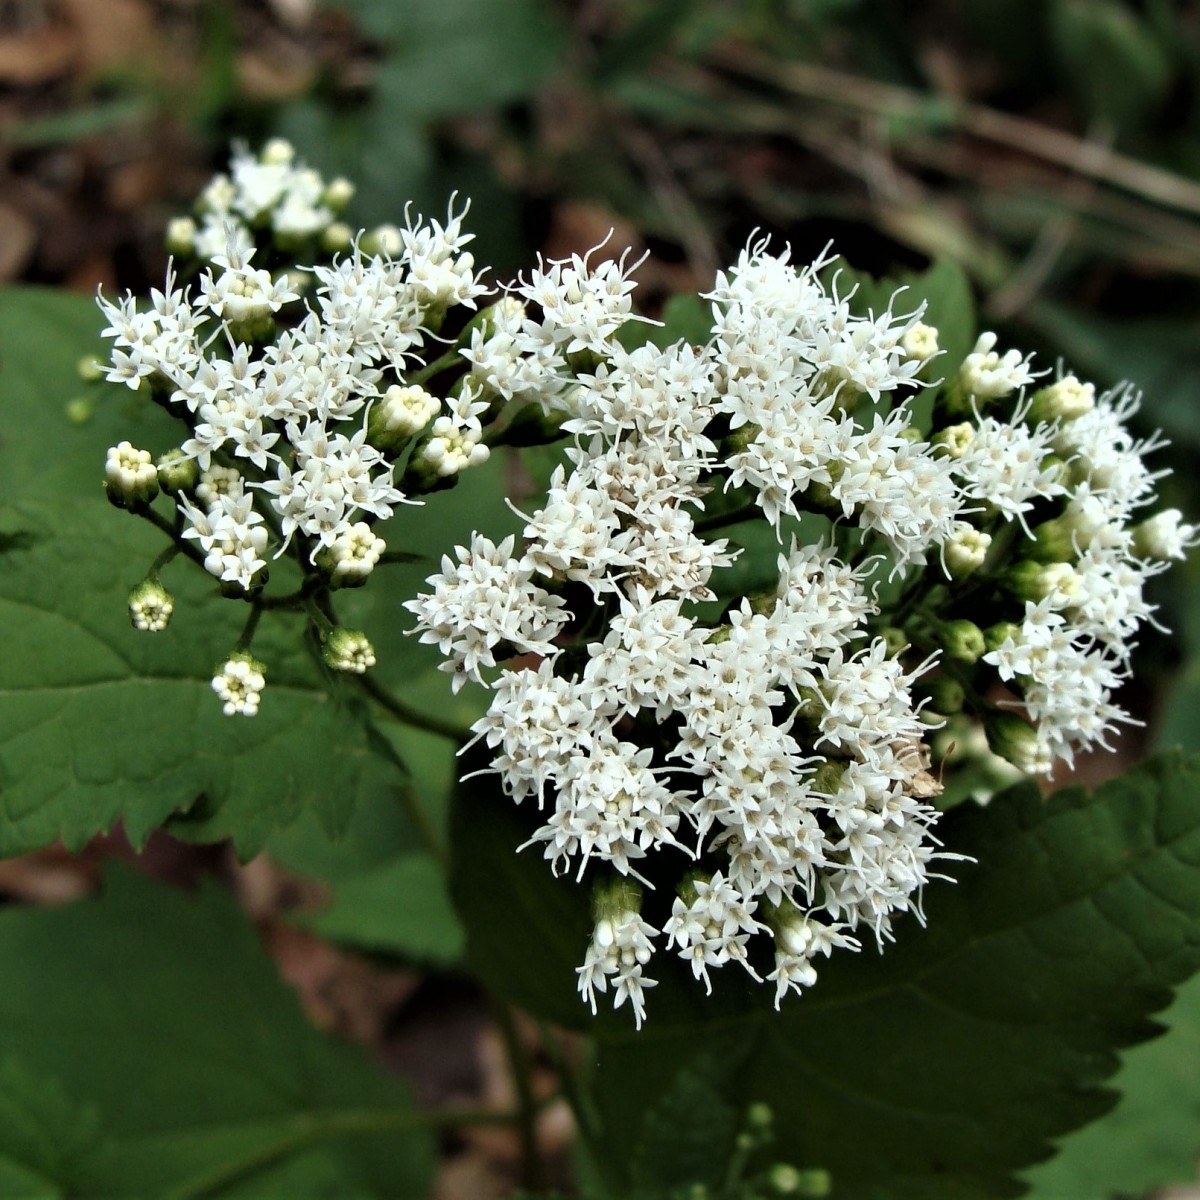 Know Your Natives – White Snakeroot